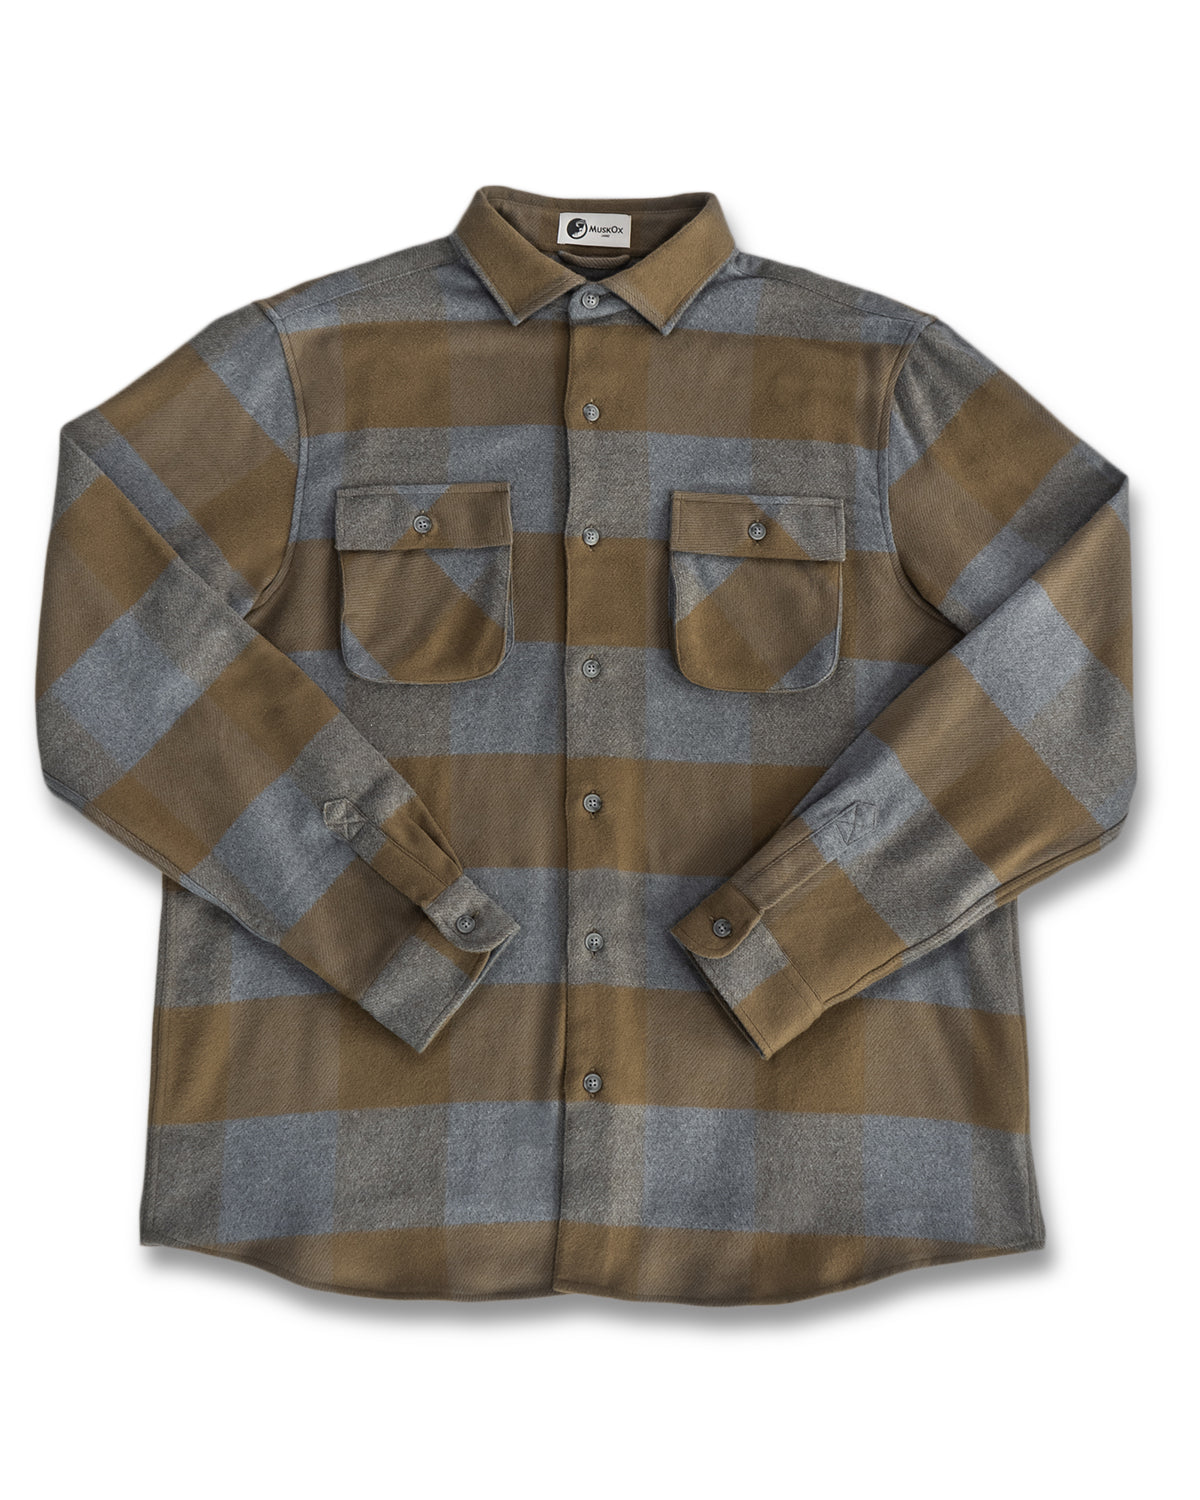 Relaxed Flannel Shirt in Caper, Heavyweight Cotton Flannel for Men